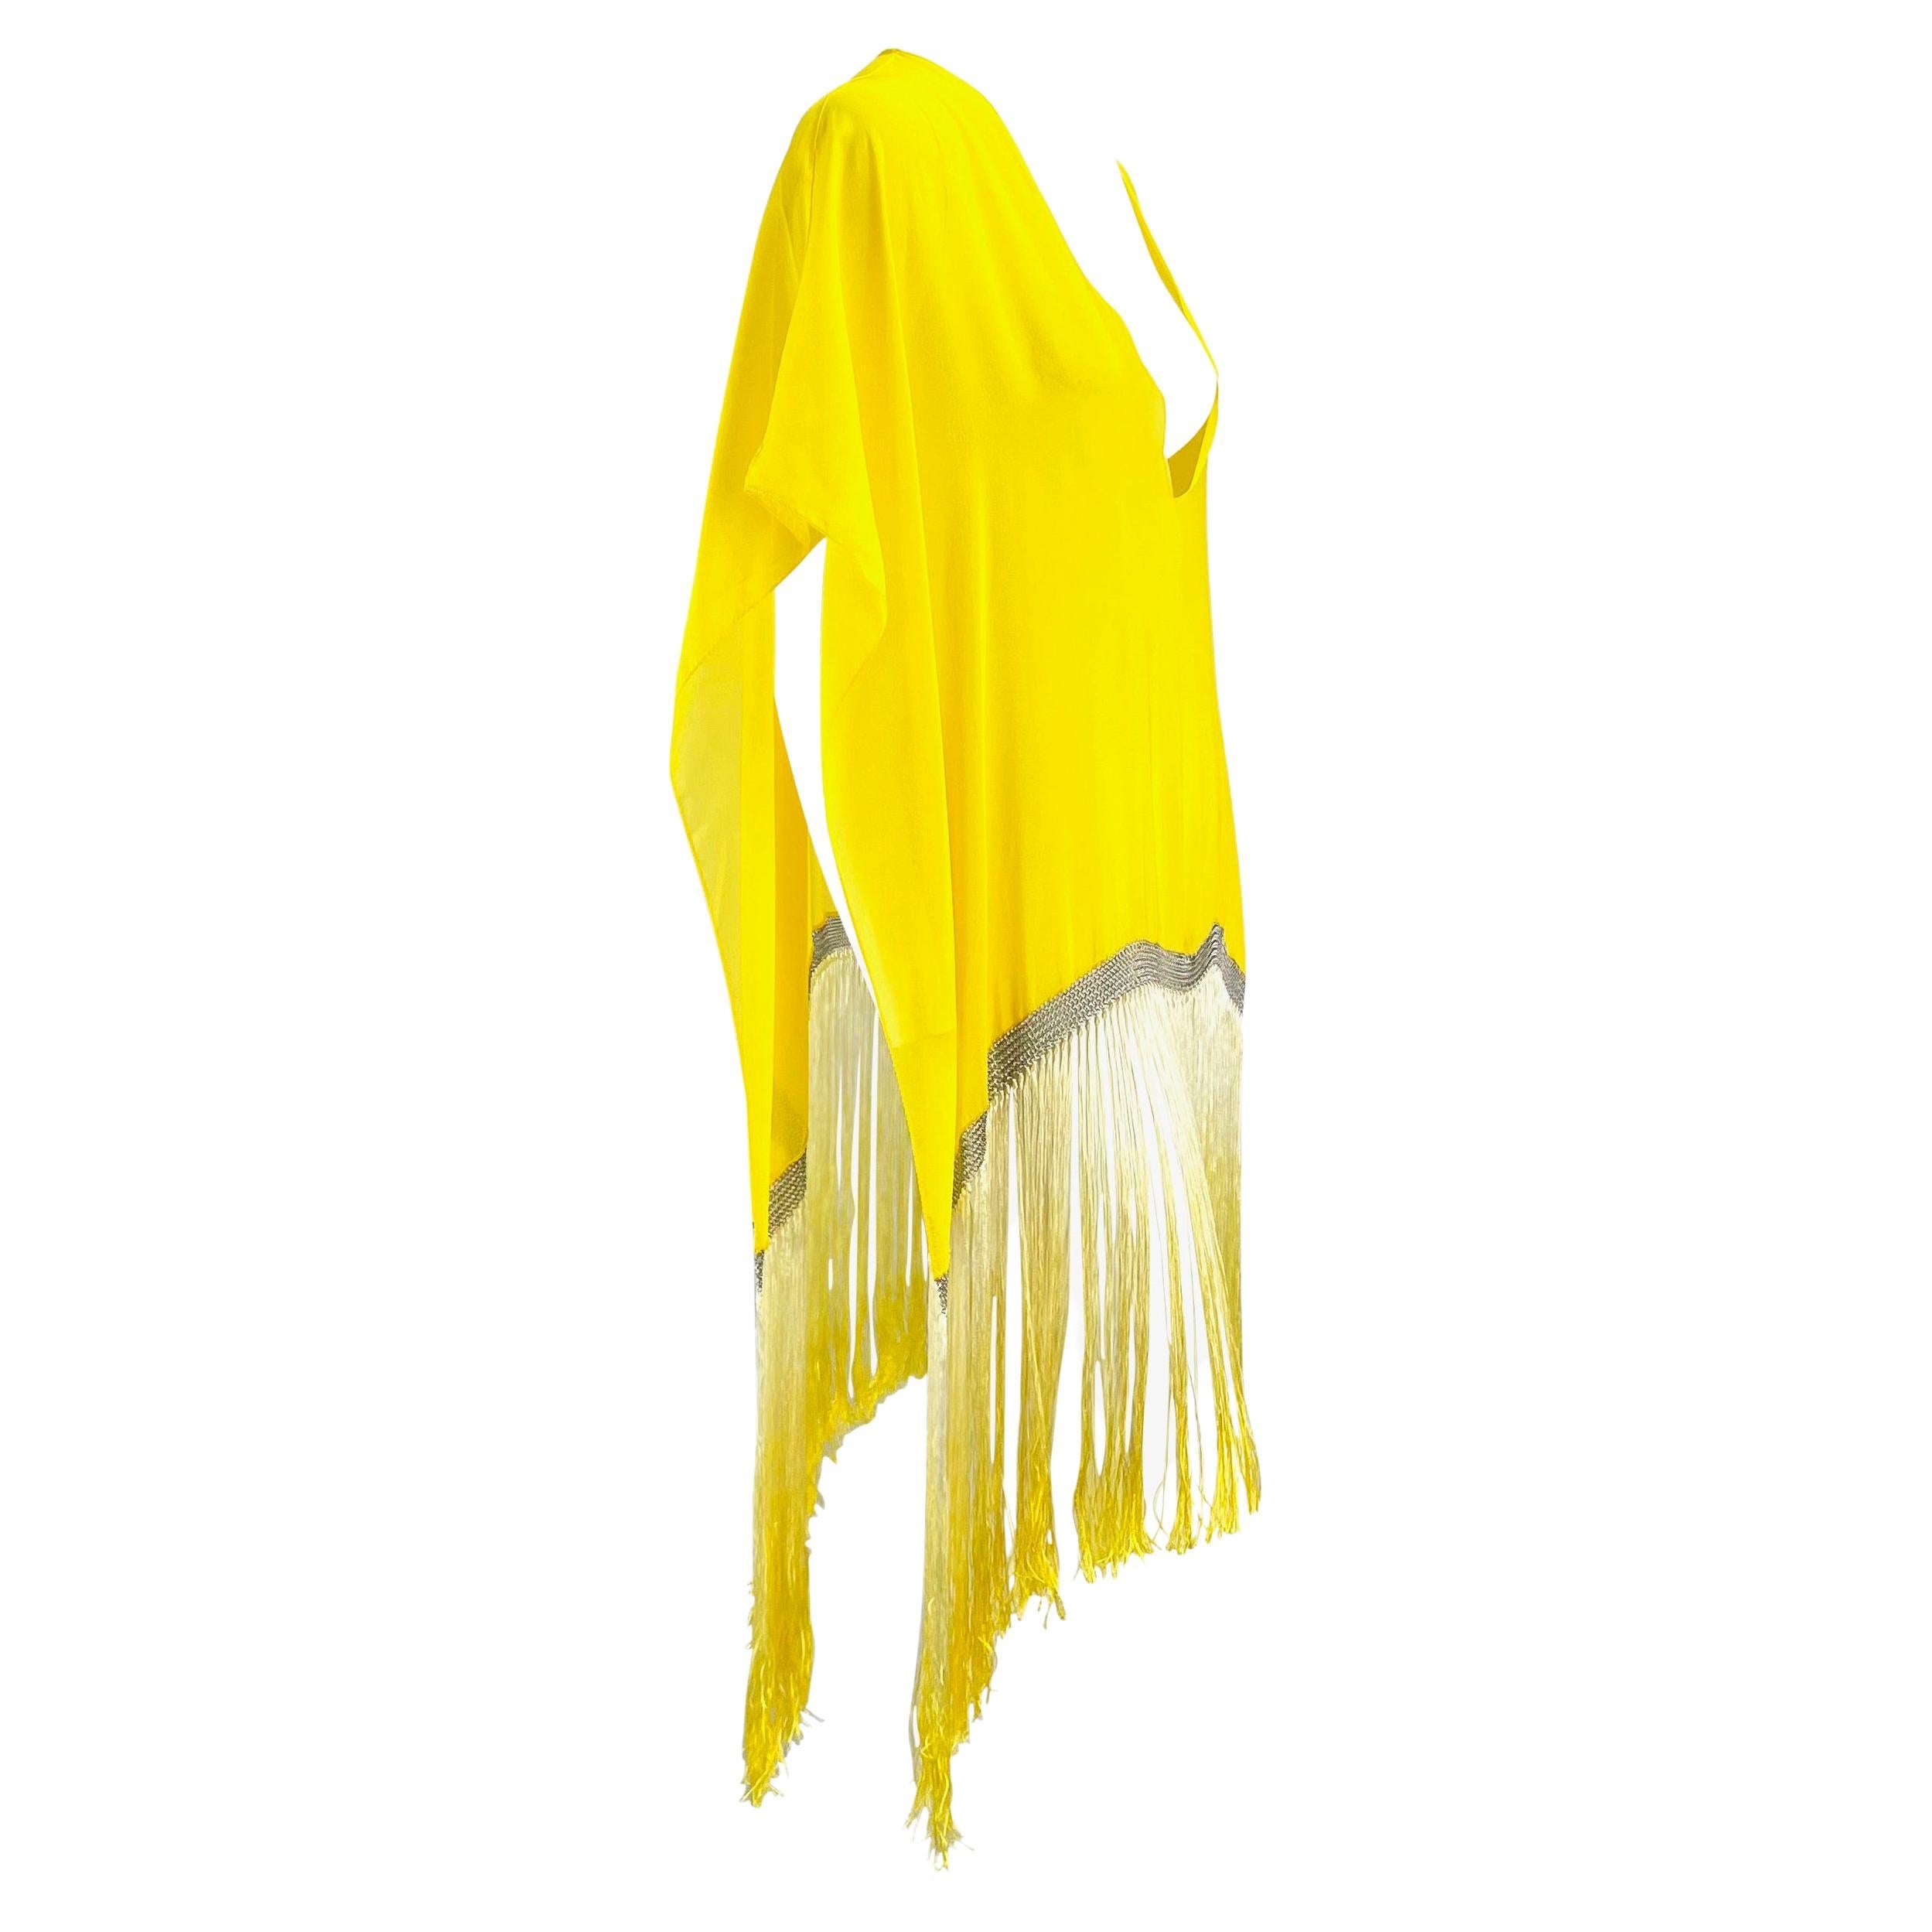 S/S 2004 Gucci by Tom Ford Chain Link Yellow Ombré Fringe Kaftan Cover Up NWT For Sale 5